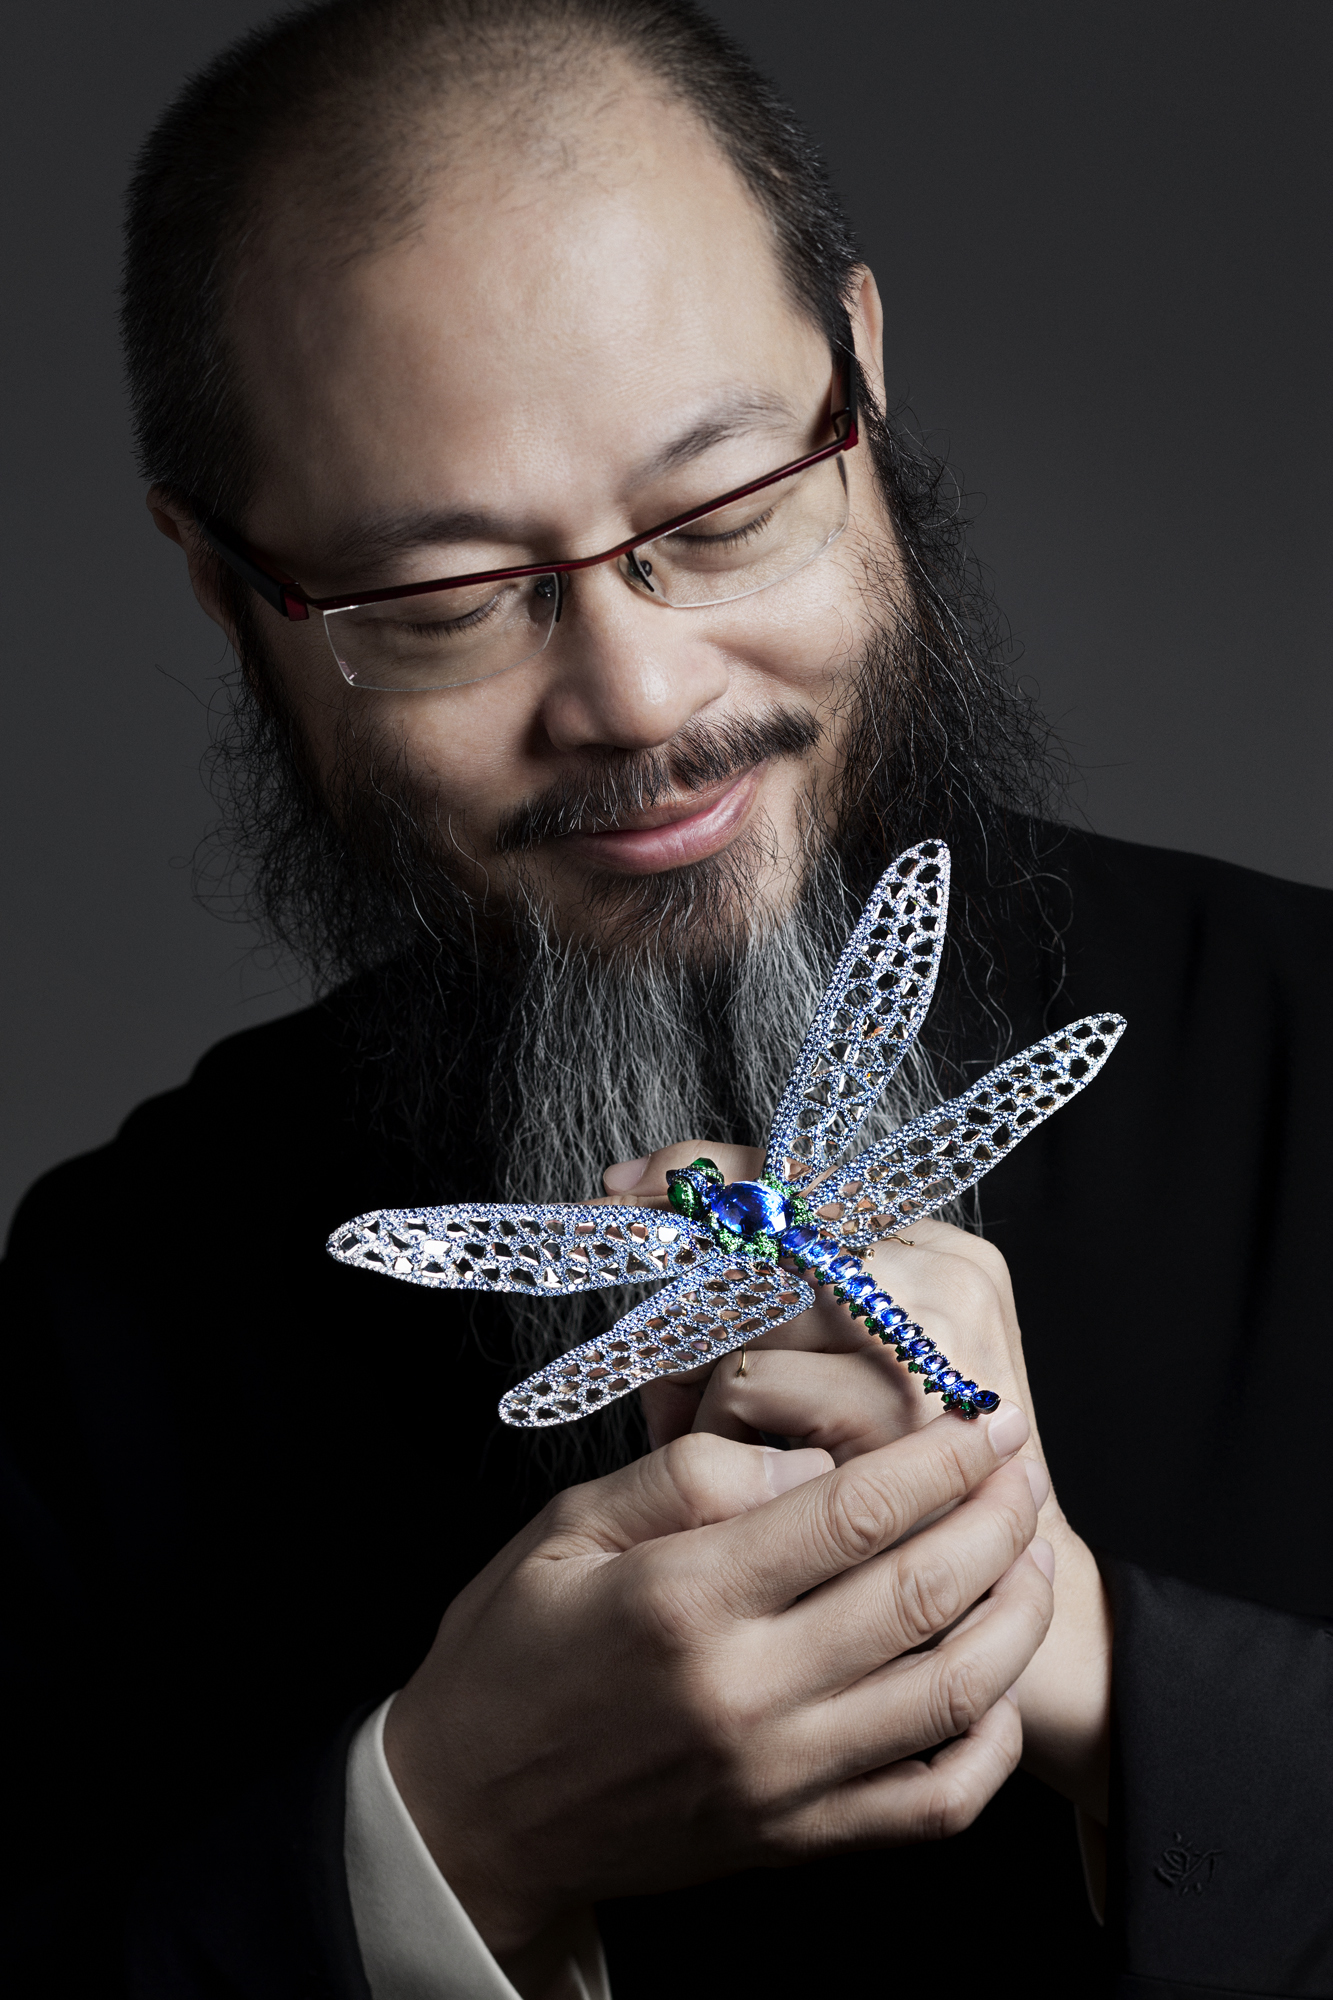 Wallace Chan, the first and only Chinese jeweller who was invited to showcase his one-of-a-kind designs alongside some of the most esteemed houses from the Place Vendome